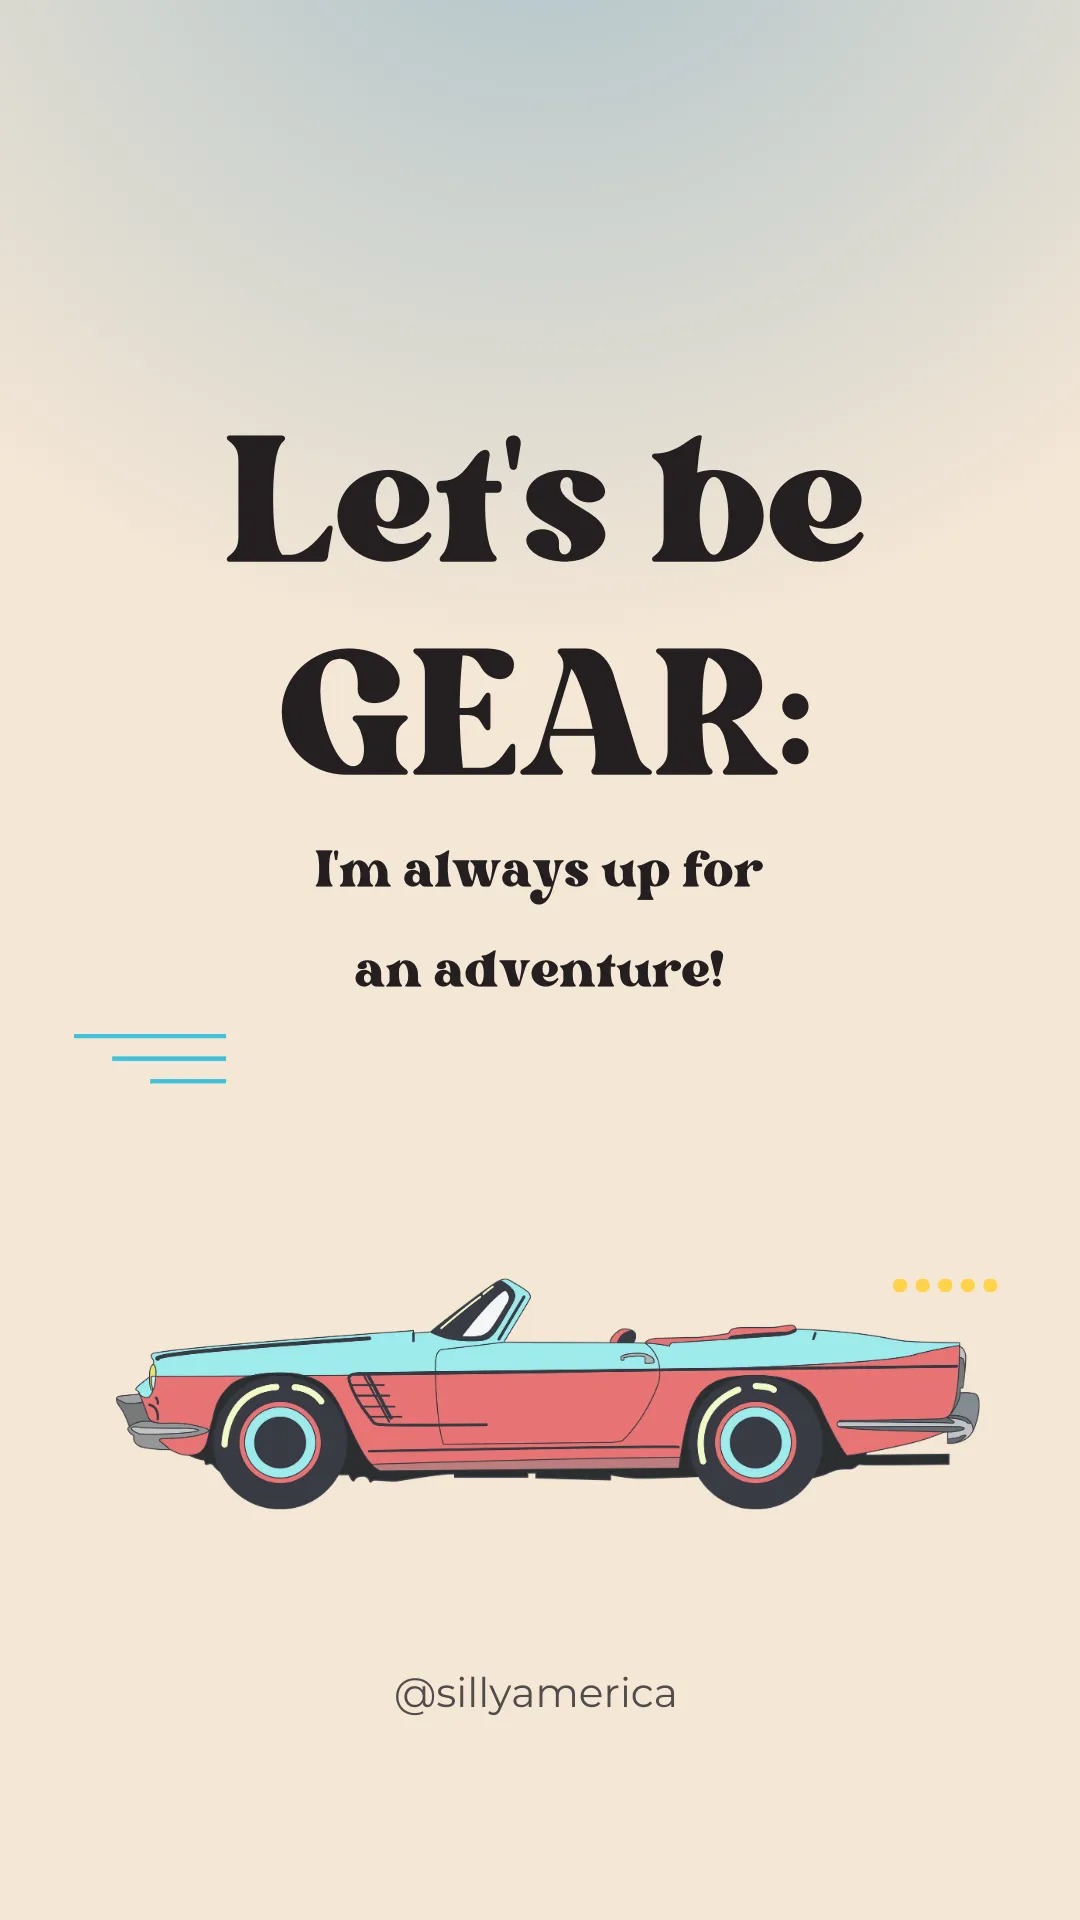 Let's be GEAR: I'm always up for an adventure!- Road Trip Puns